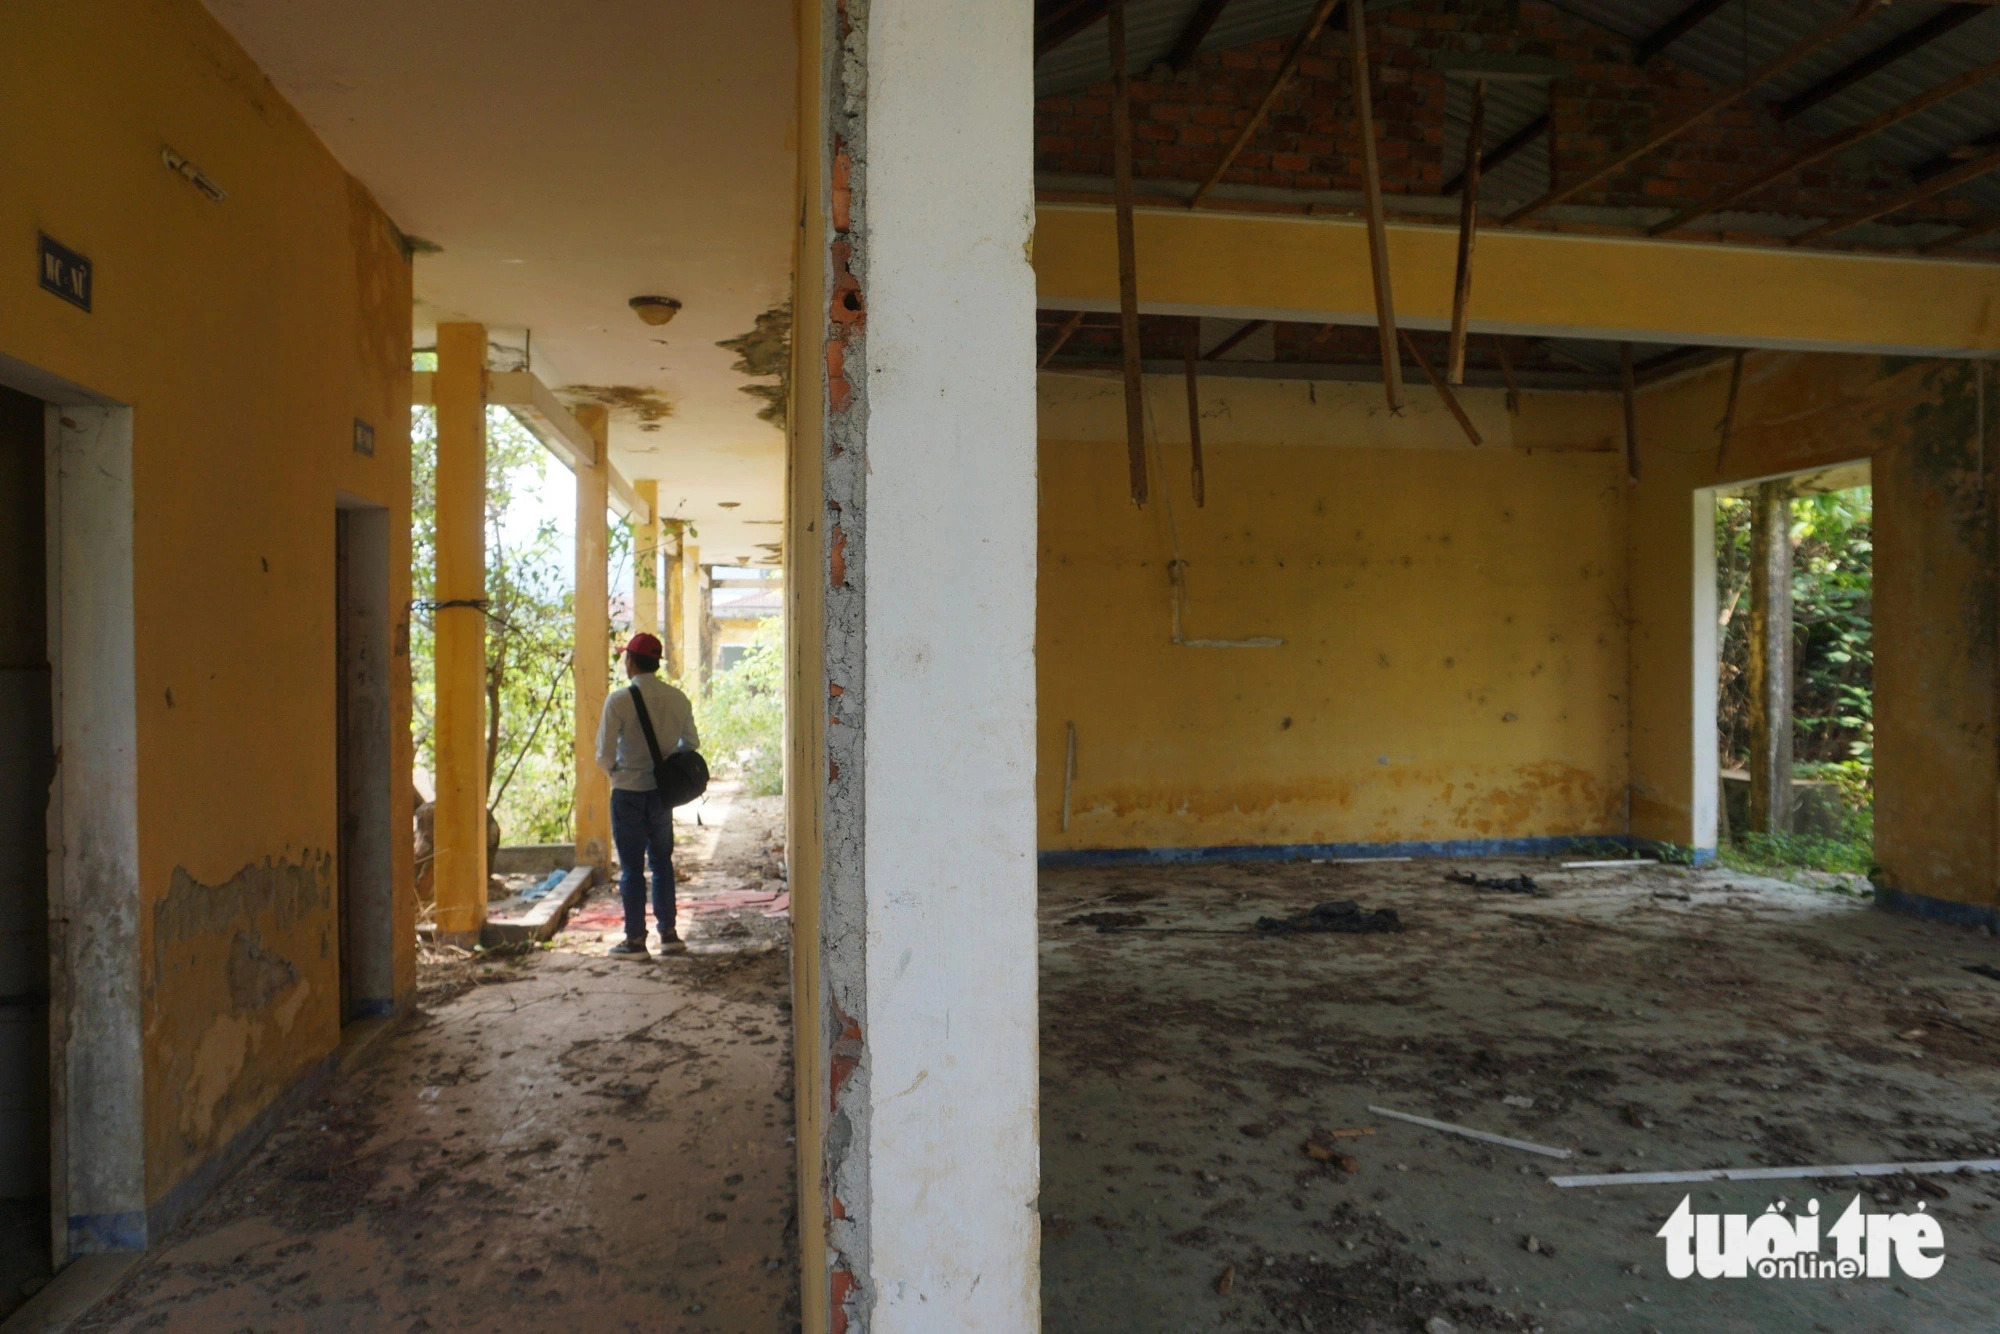 The administration of Hoa Vang District in Da Nang, central Vietnam said that all of the blocks of the center have deteriorated, with all of the doors and windows no longer existing. Photo: Doan Nhan / Tuoi Tre